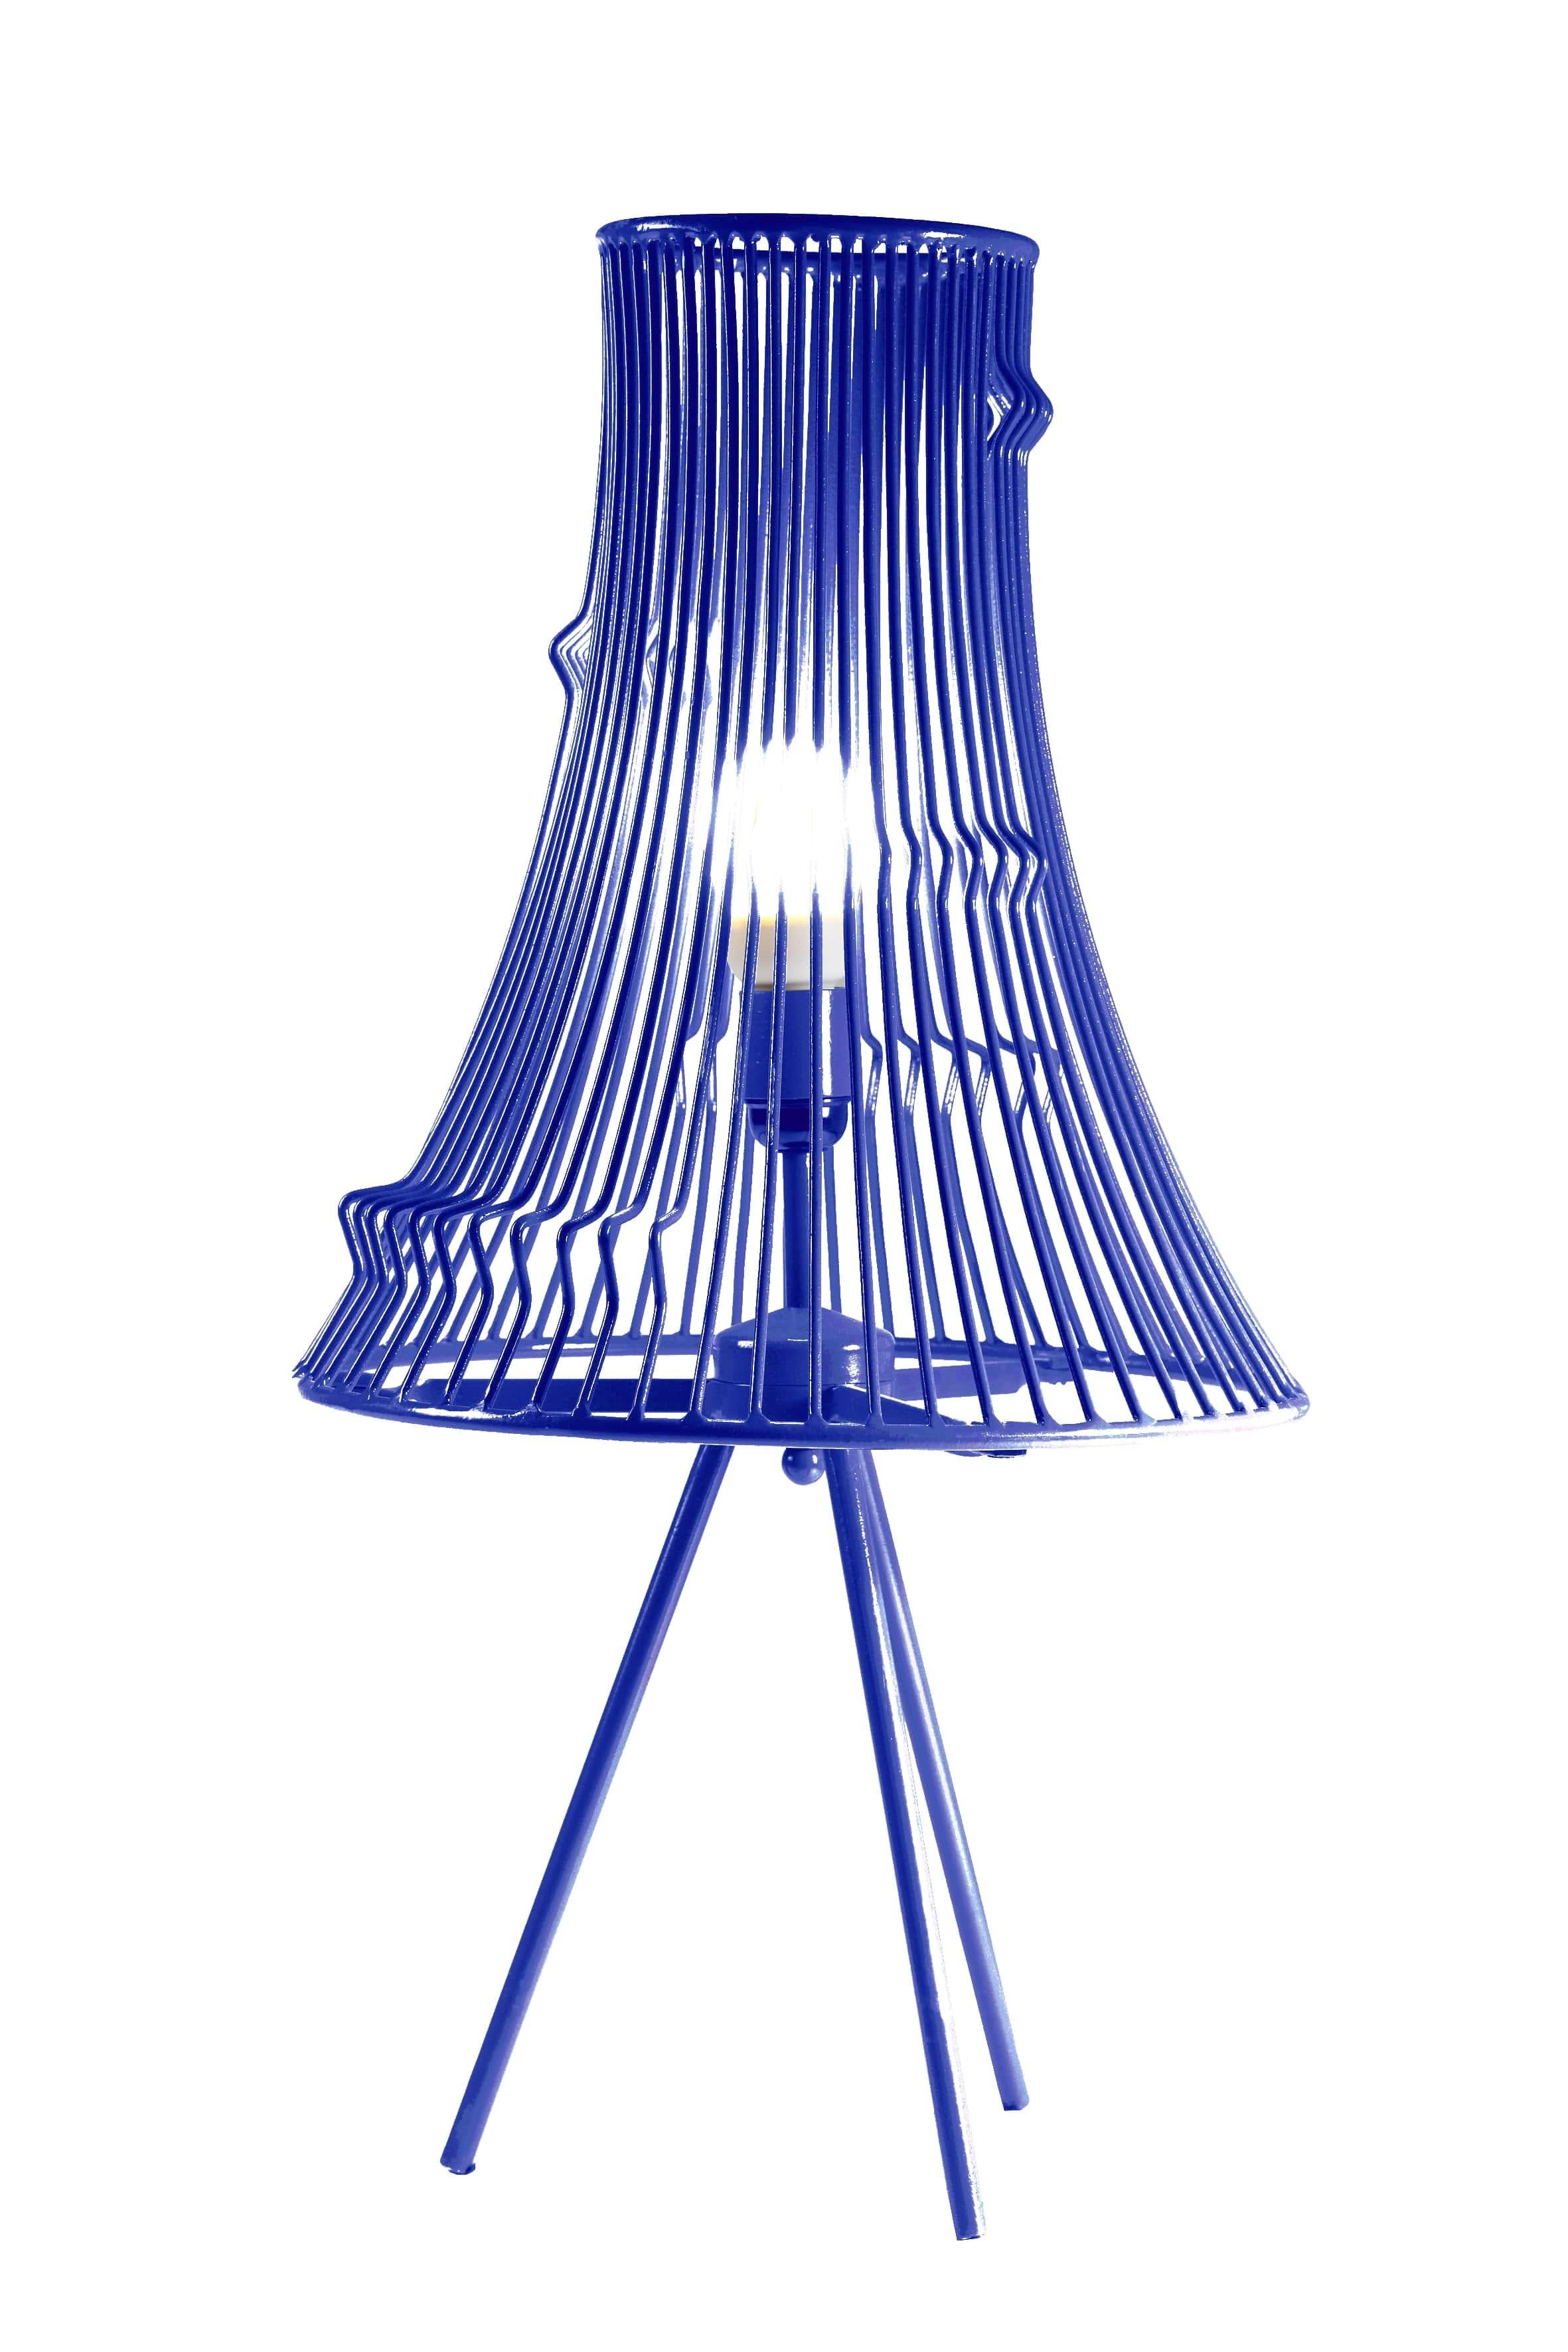  Its structure is a mesh of metal wire carefully powder coated for a even and smooth finish. Made to Order. 

Utu Lamps is part of the Mambo Unlimited Ideas design group from Portugal.
Utu’s contemporary aesthetic results in original top-quality